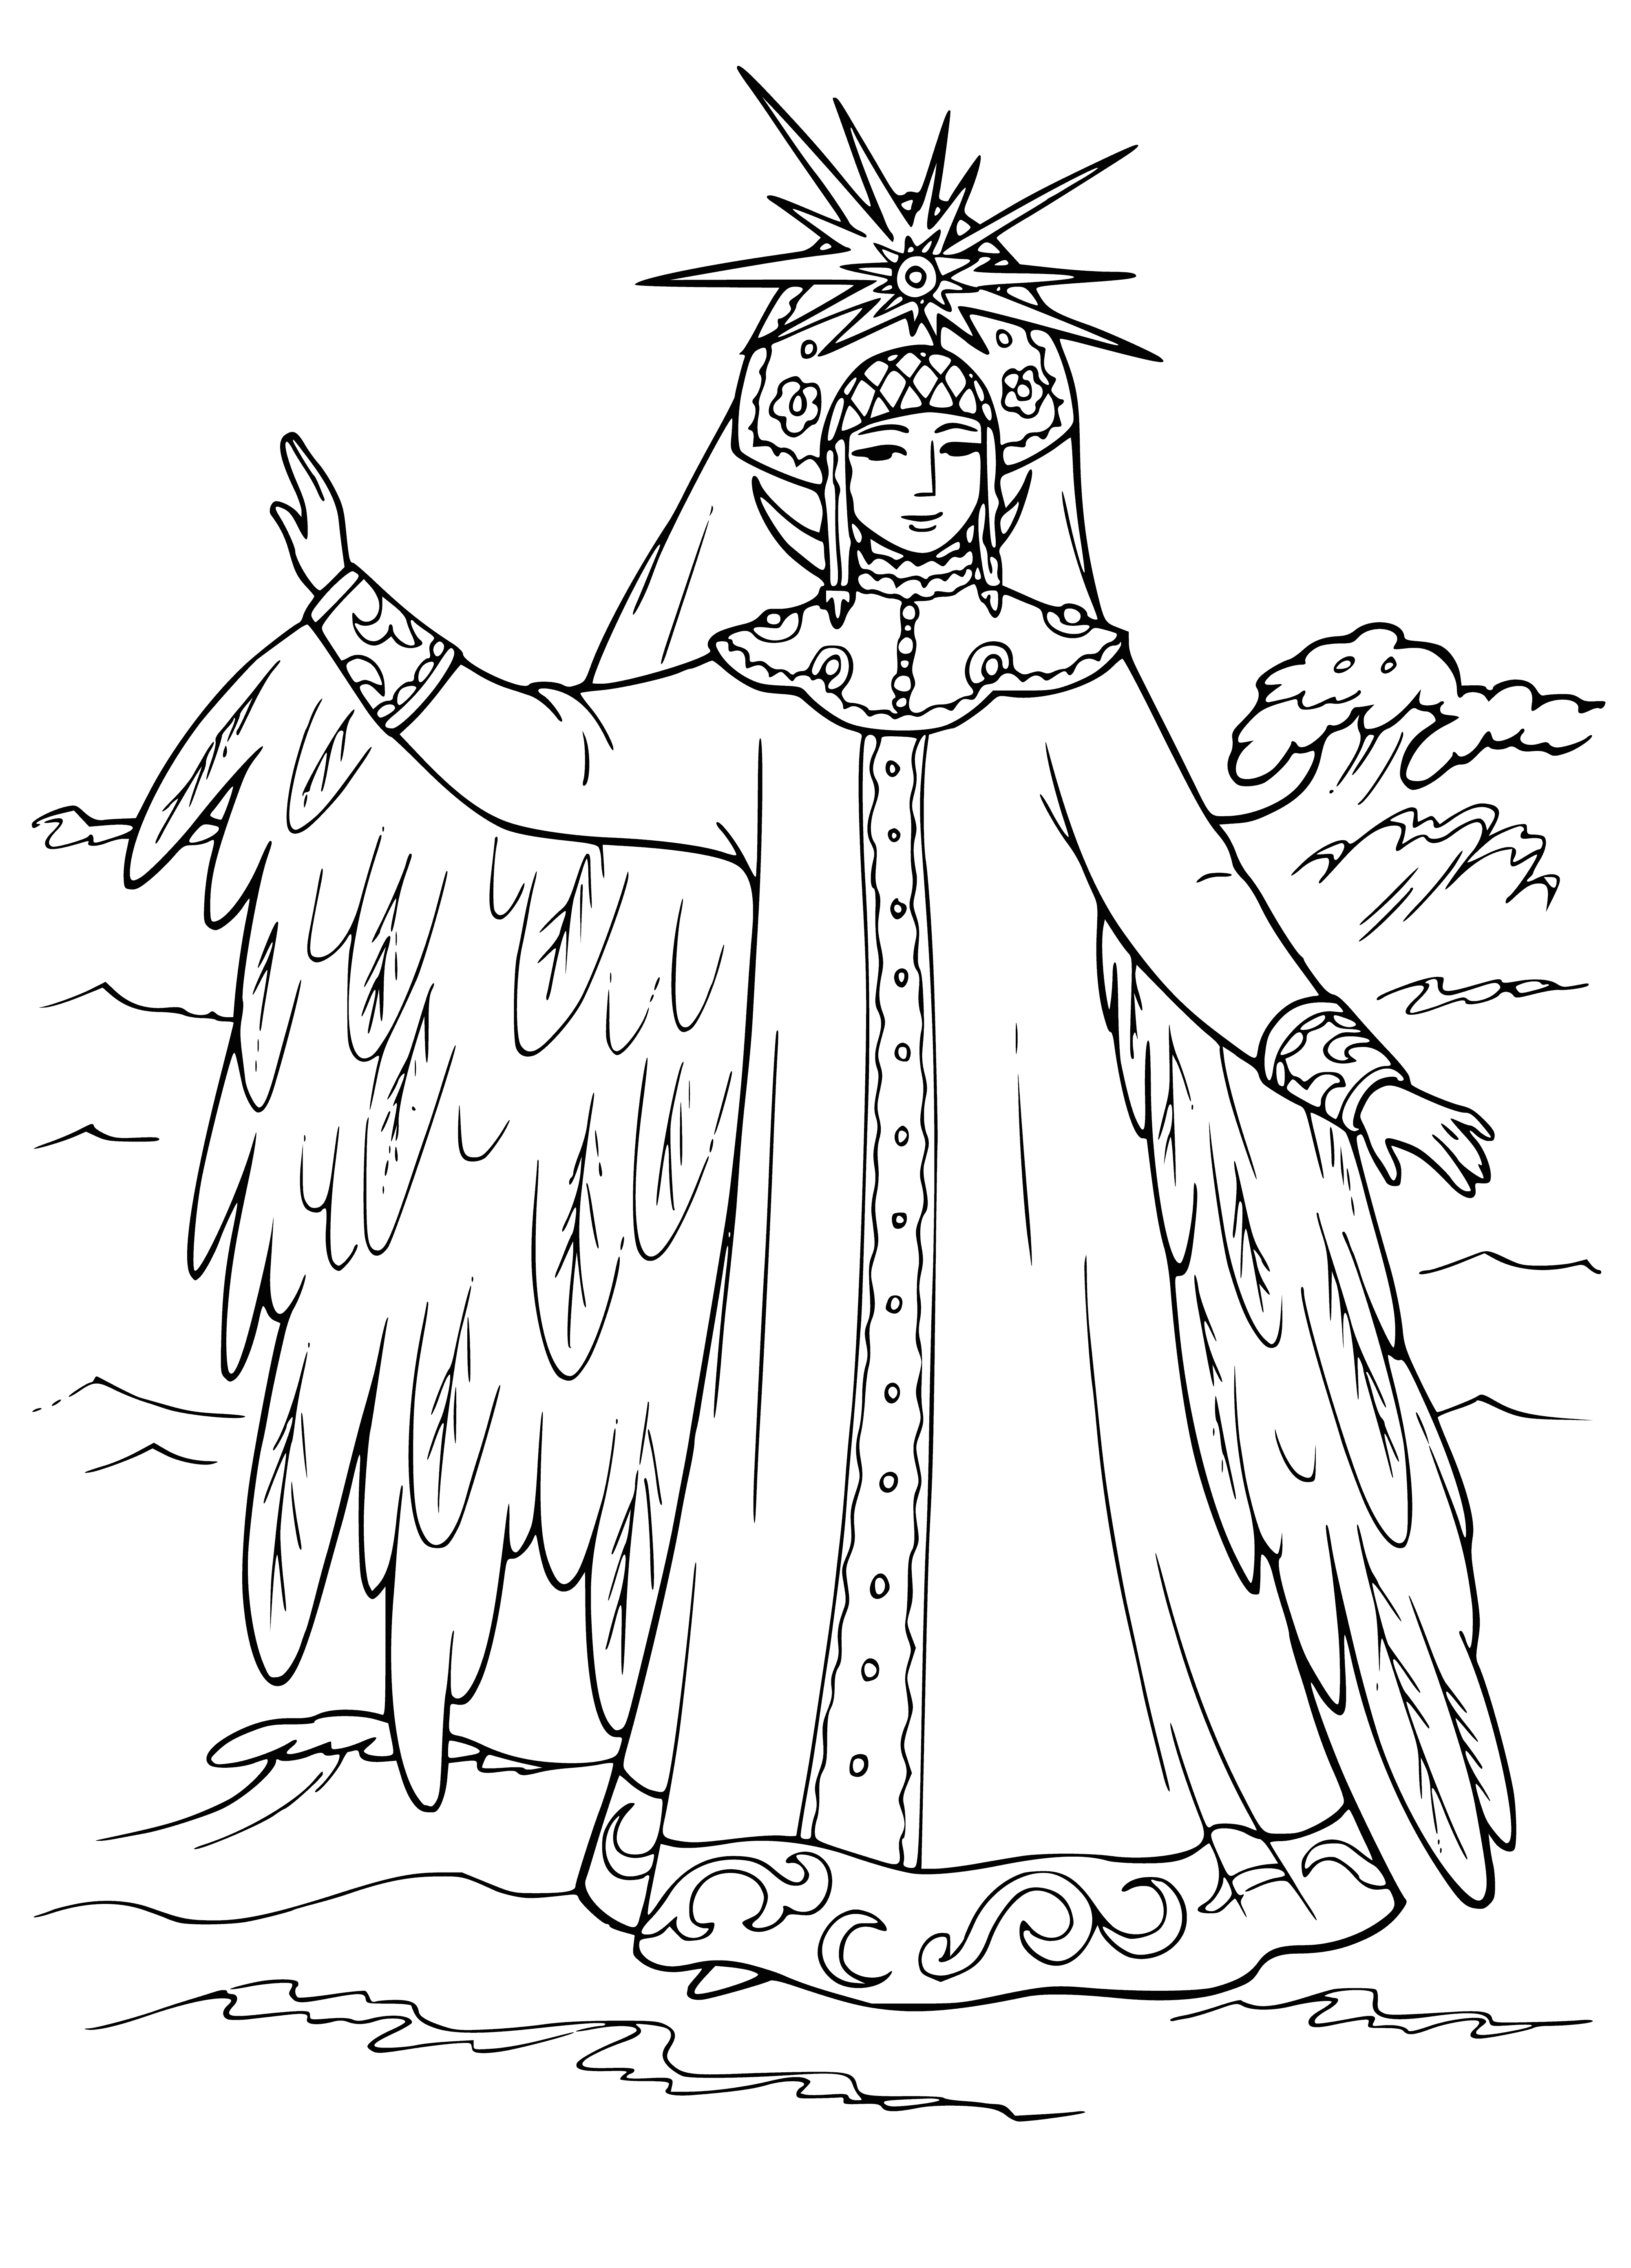 coloring page: The Swan Princess stands in a dreamy pose on the lake shore, wearing a beautiful white dress adorned with blue flowers.